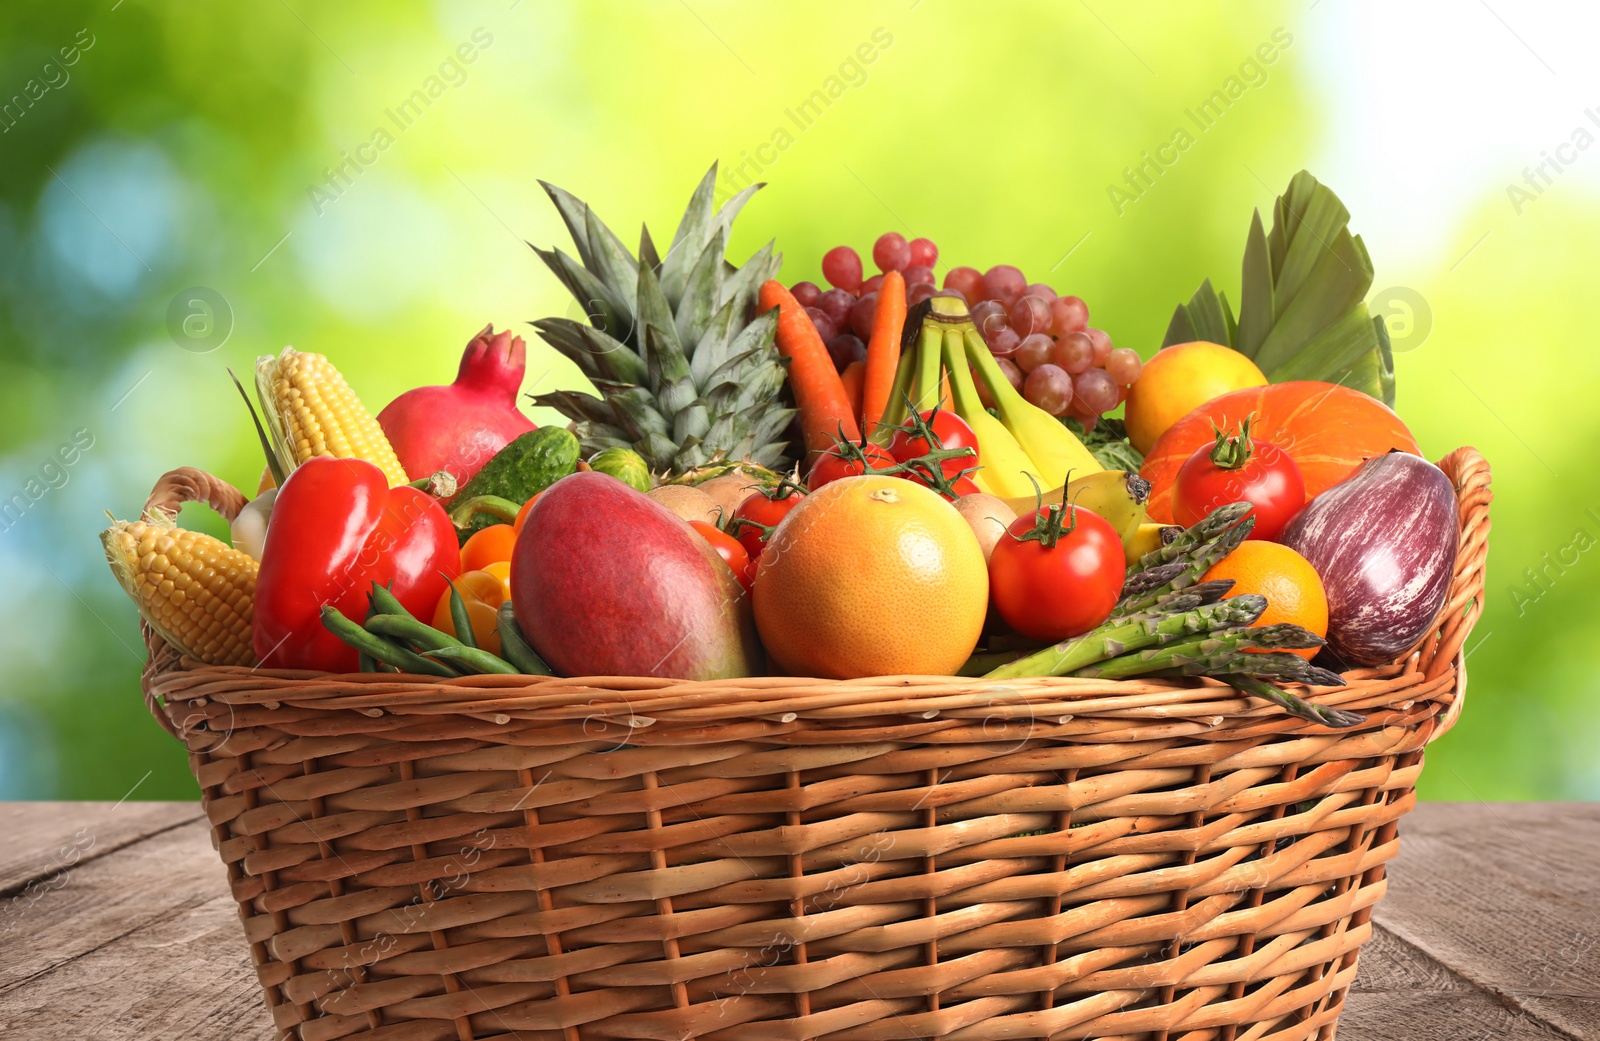 Image of Fresh organic fruits and vegetables in wicker basket on wooden table, closeup